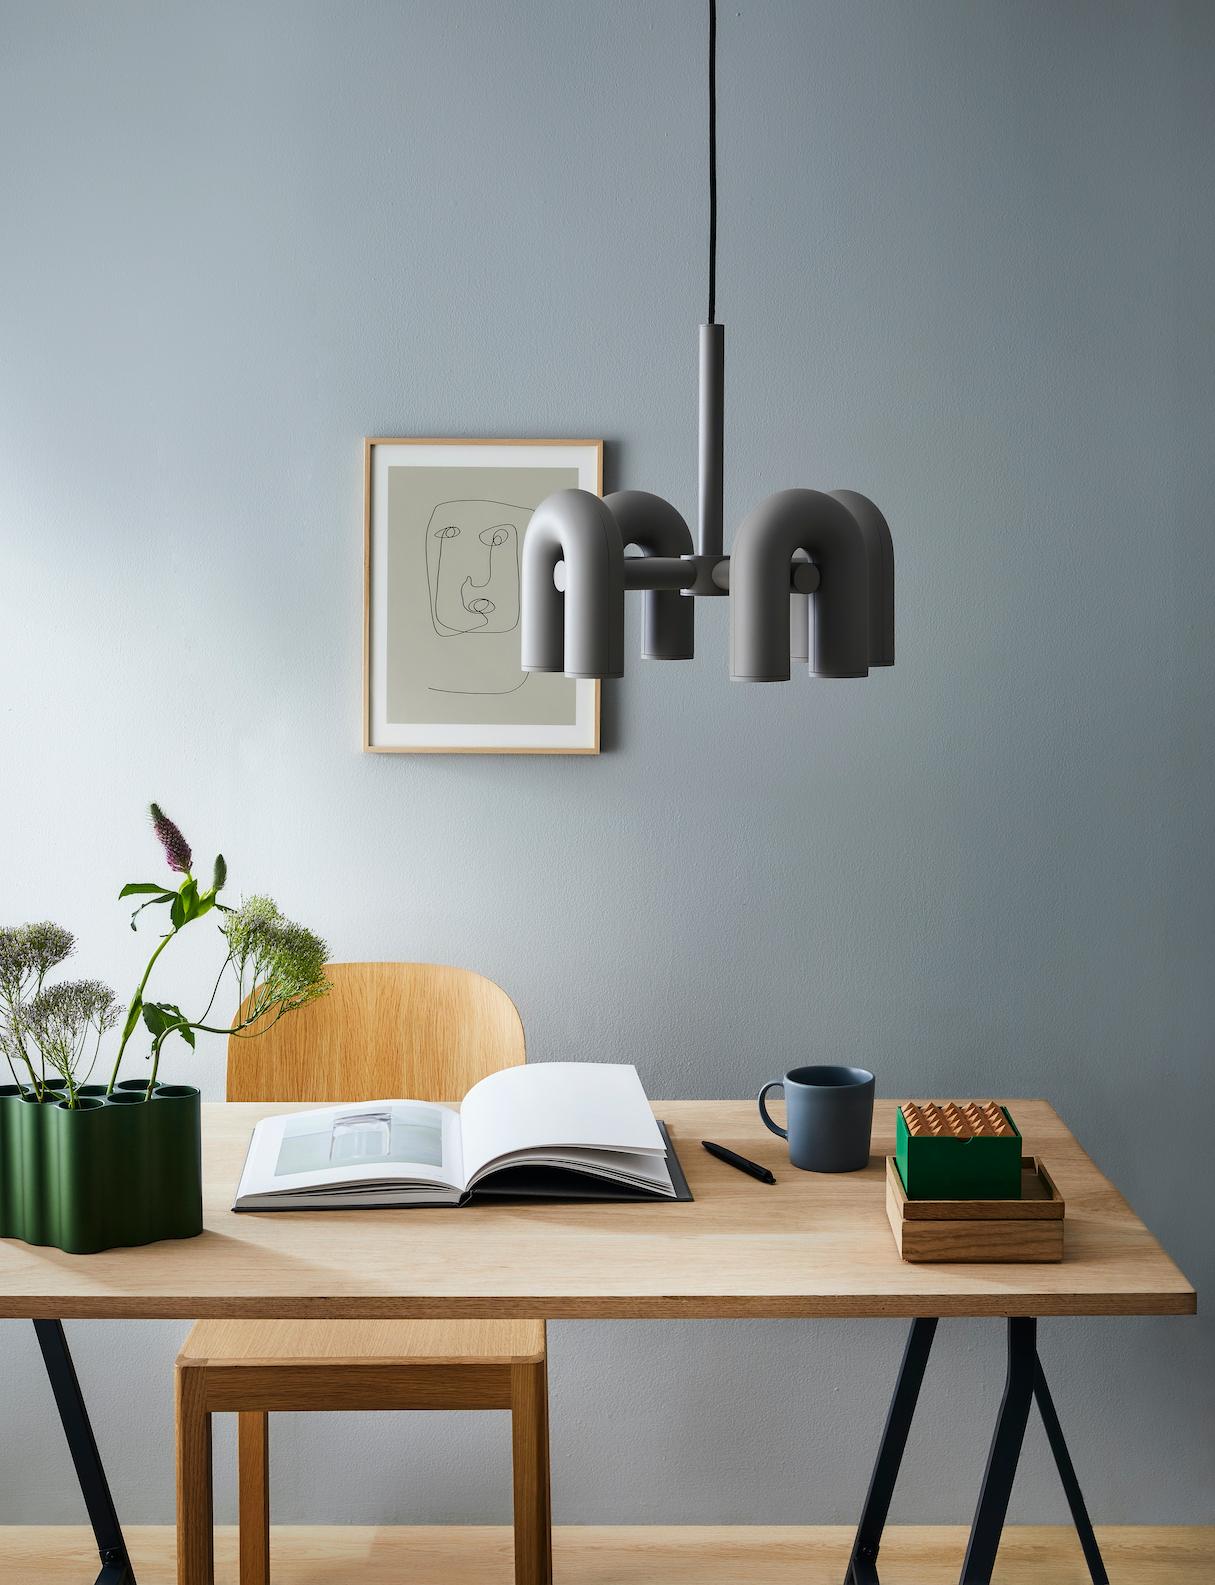 Cirkus chandelier by AGO Lighting
Coated ABS, aluminum
LED GU10 110-240V (not included)

Two sizes available: 4 pairs of lamps / 6 pairs of lamps
Four colors available: Charcoal, grey, green, terracotta


AGO is a Korean design studio